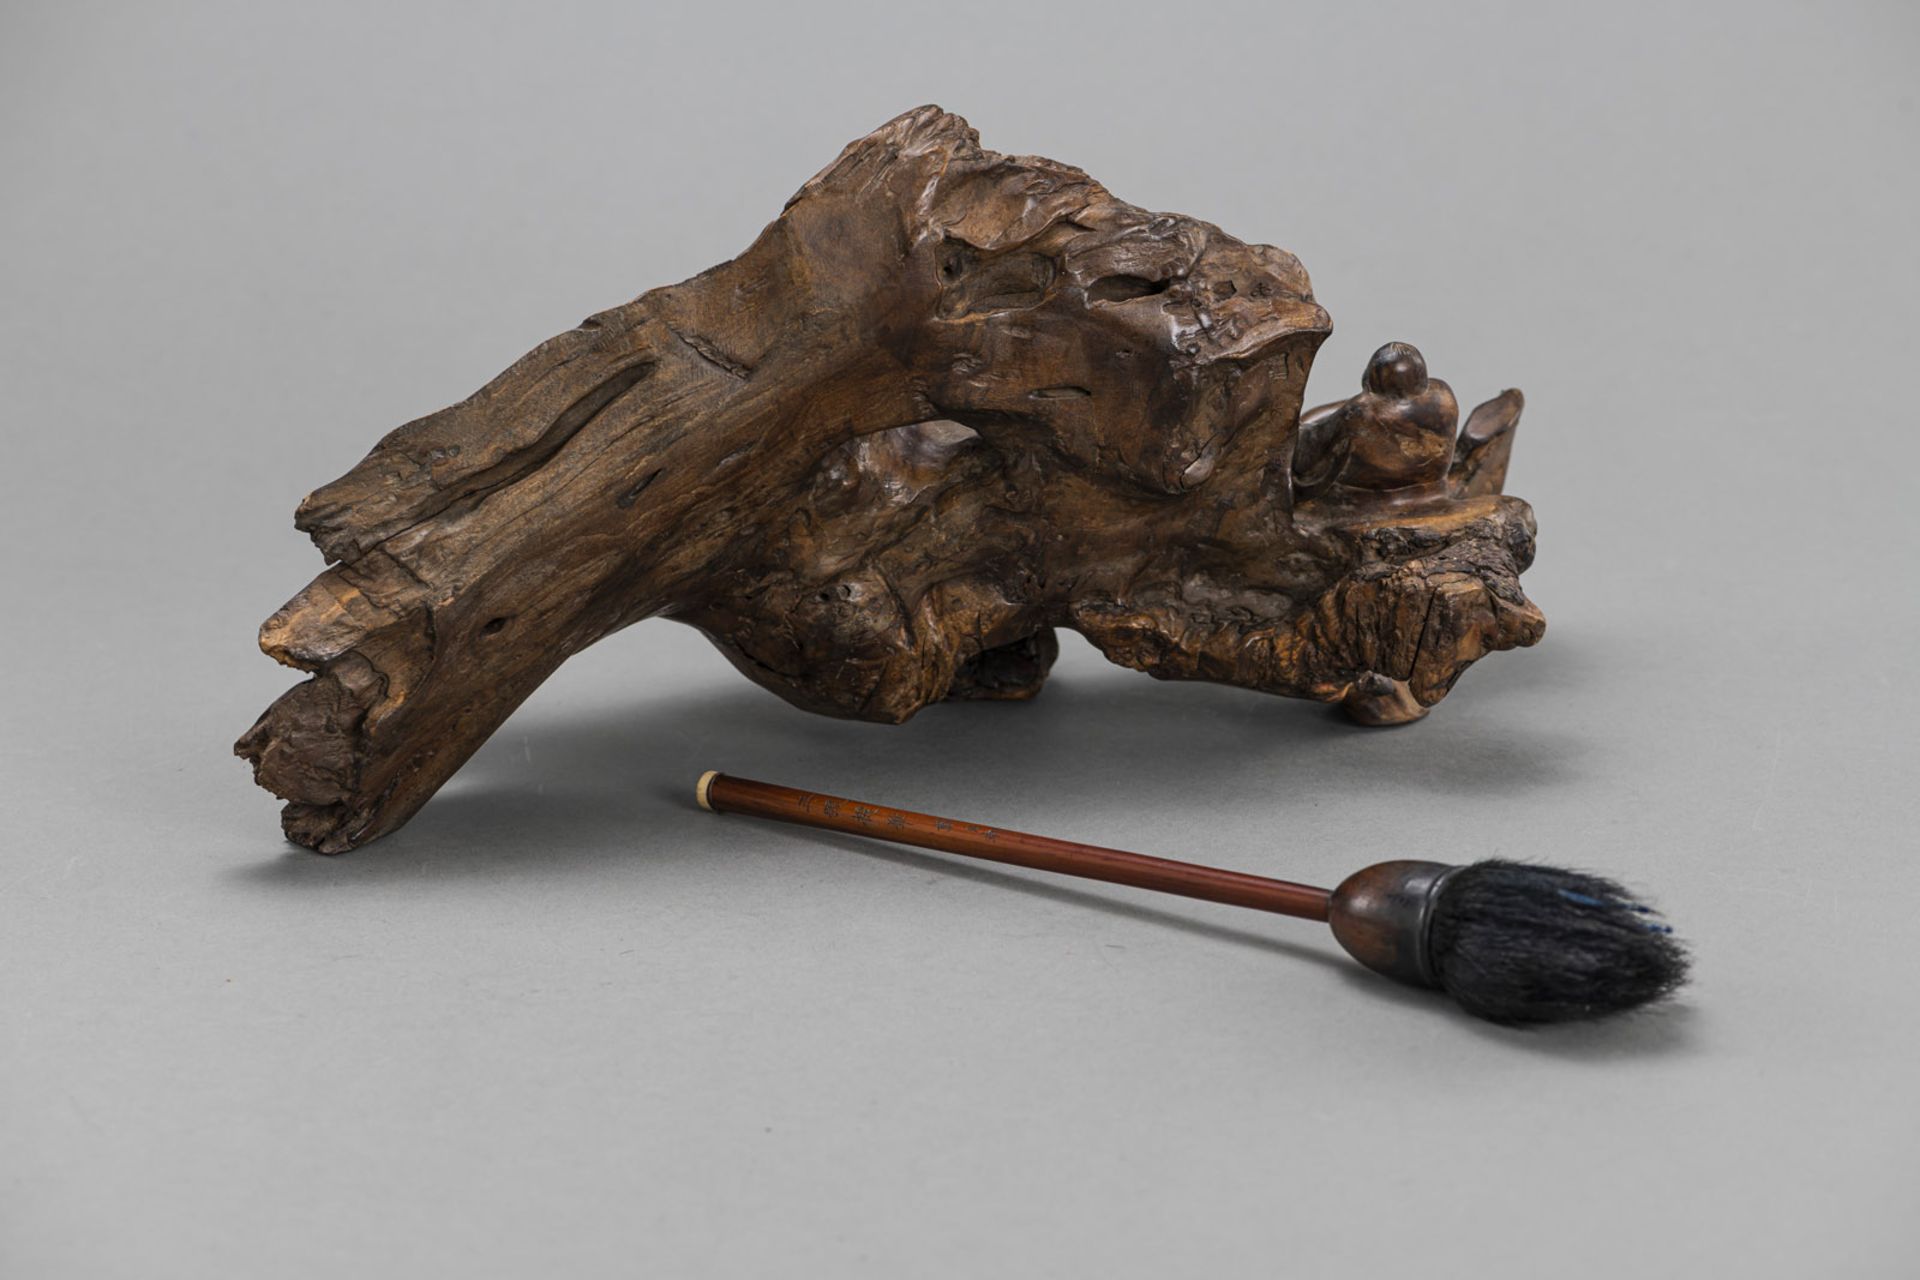 A CARVED WOOD BRUSH HOLDER SHOWING A SCHOLAR IN THE GARDEN, AND A BRUSH - Image 3 of 3